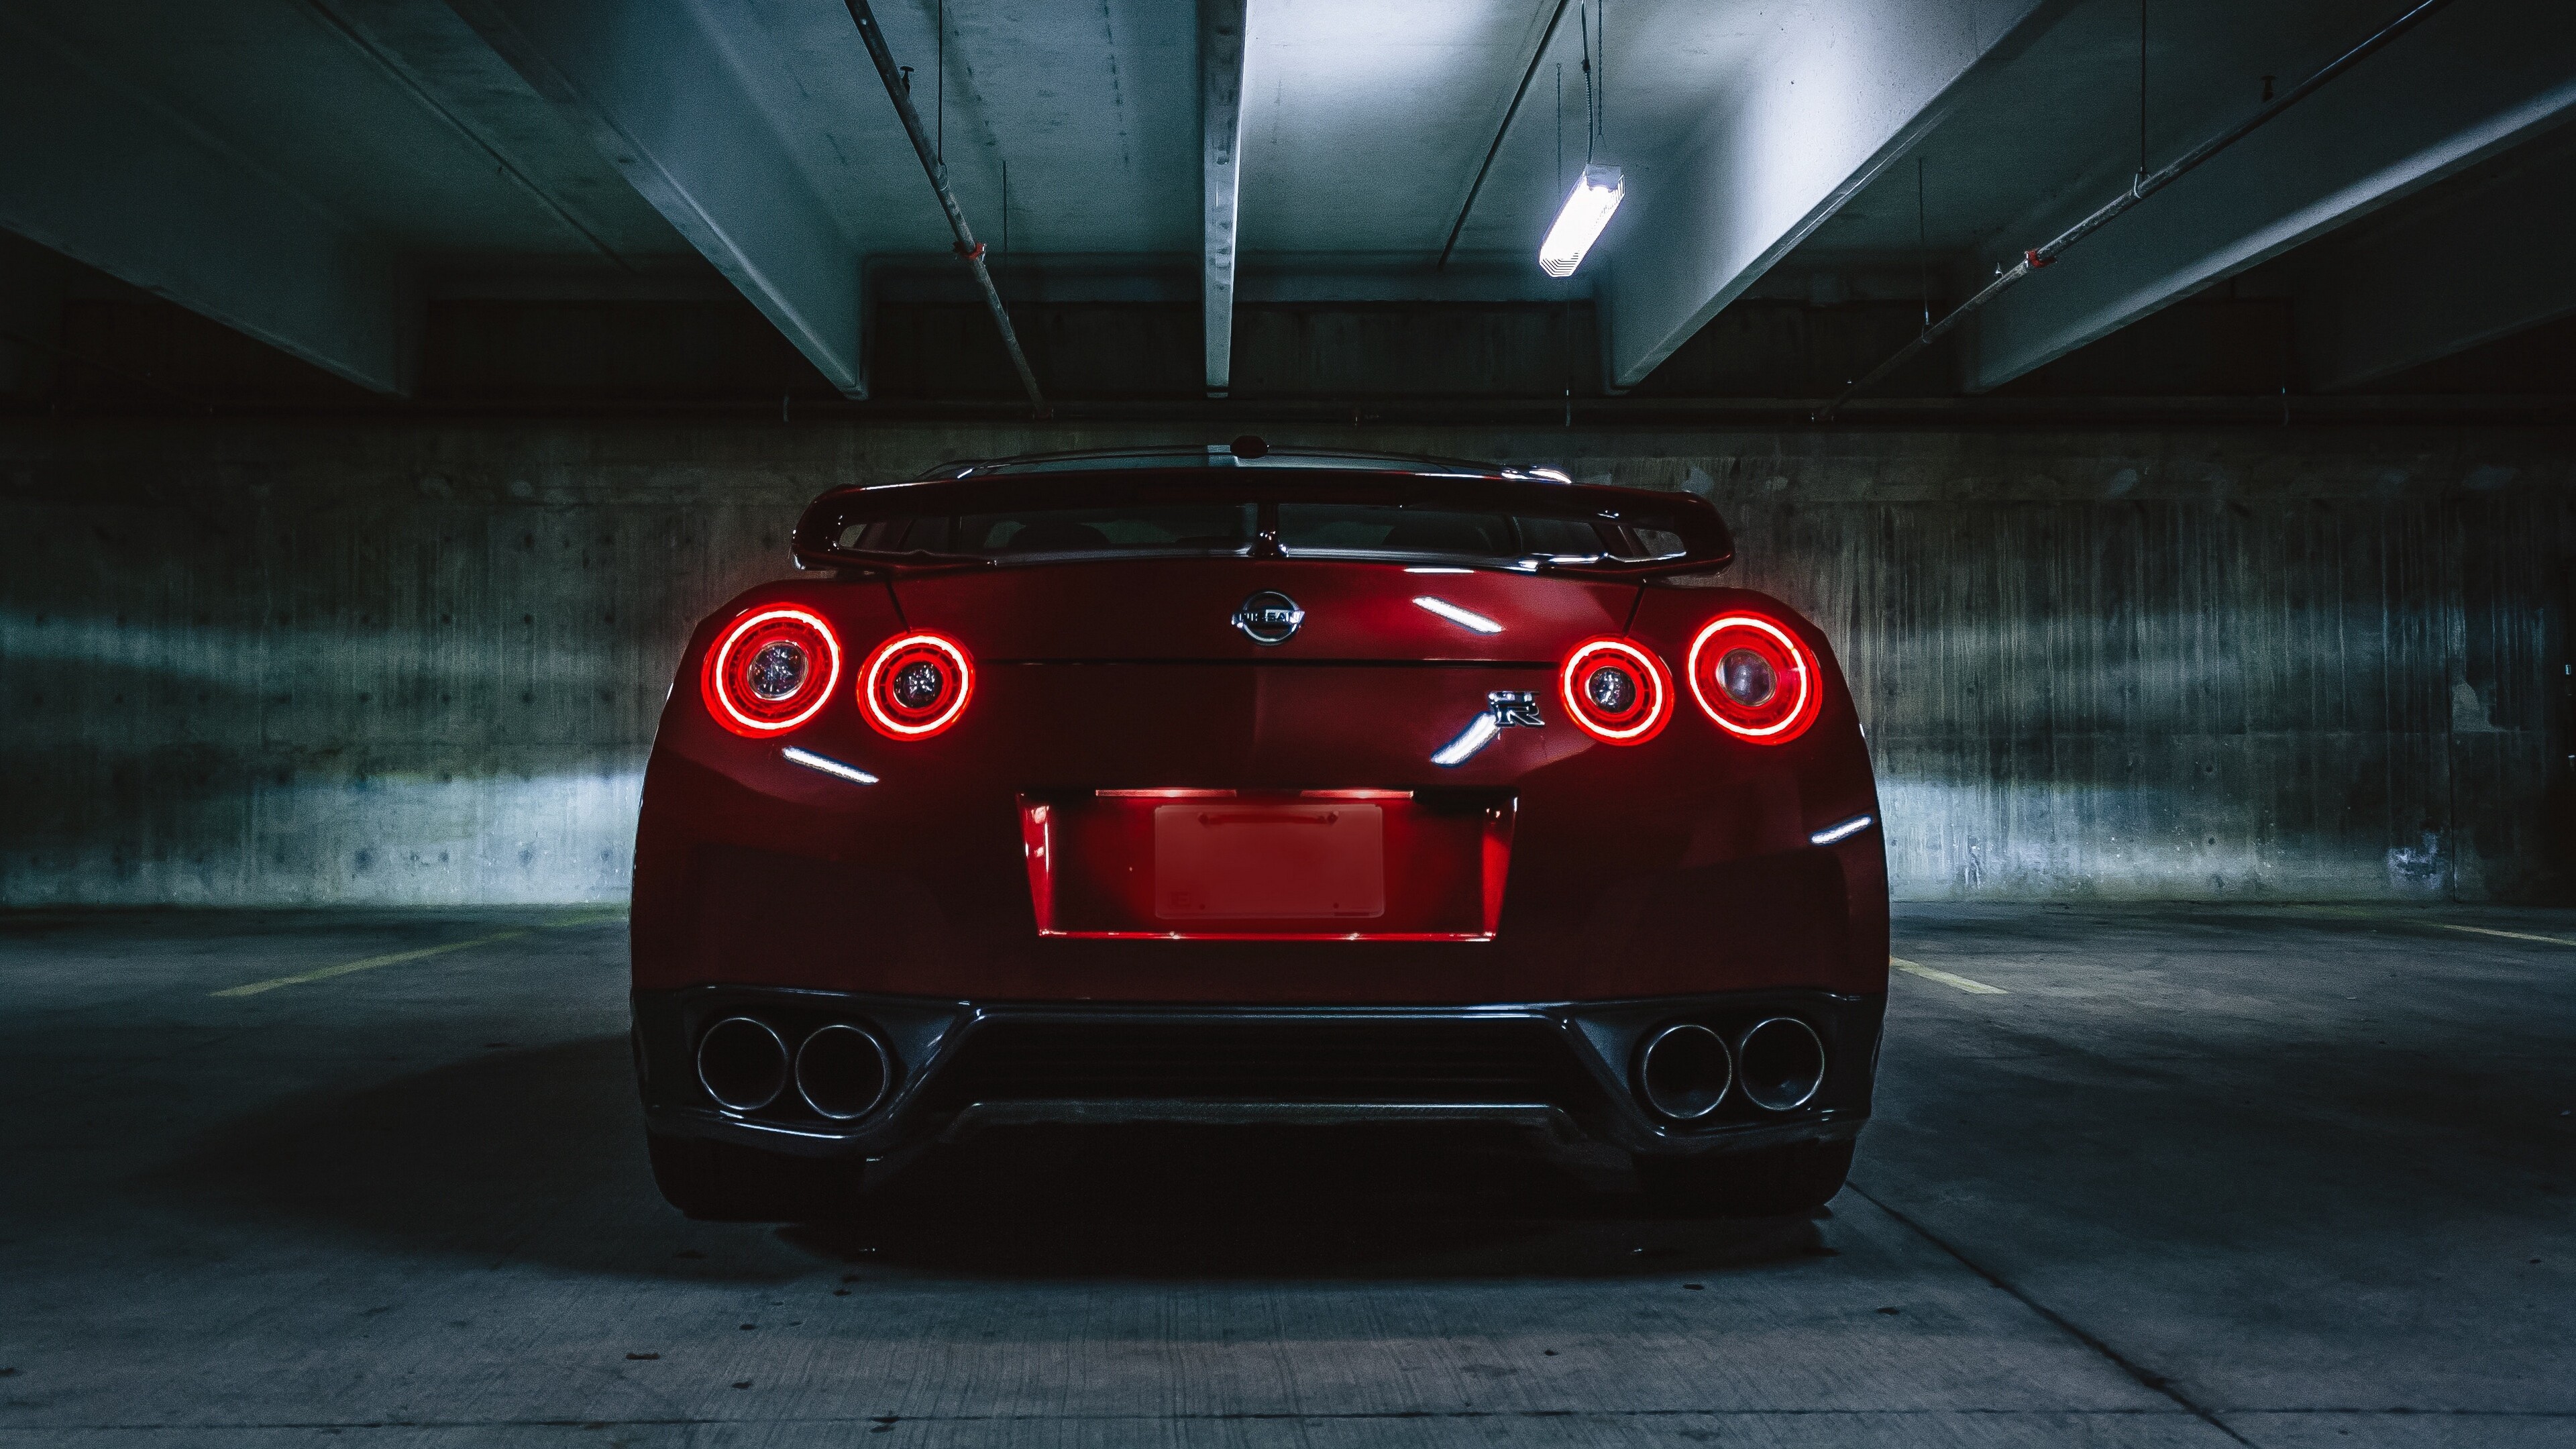 Nissan: The GT-R, The latest generation of Nissan's premium sports car. 3840x2160 4K Background.